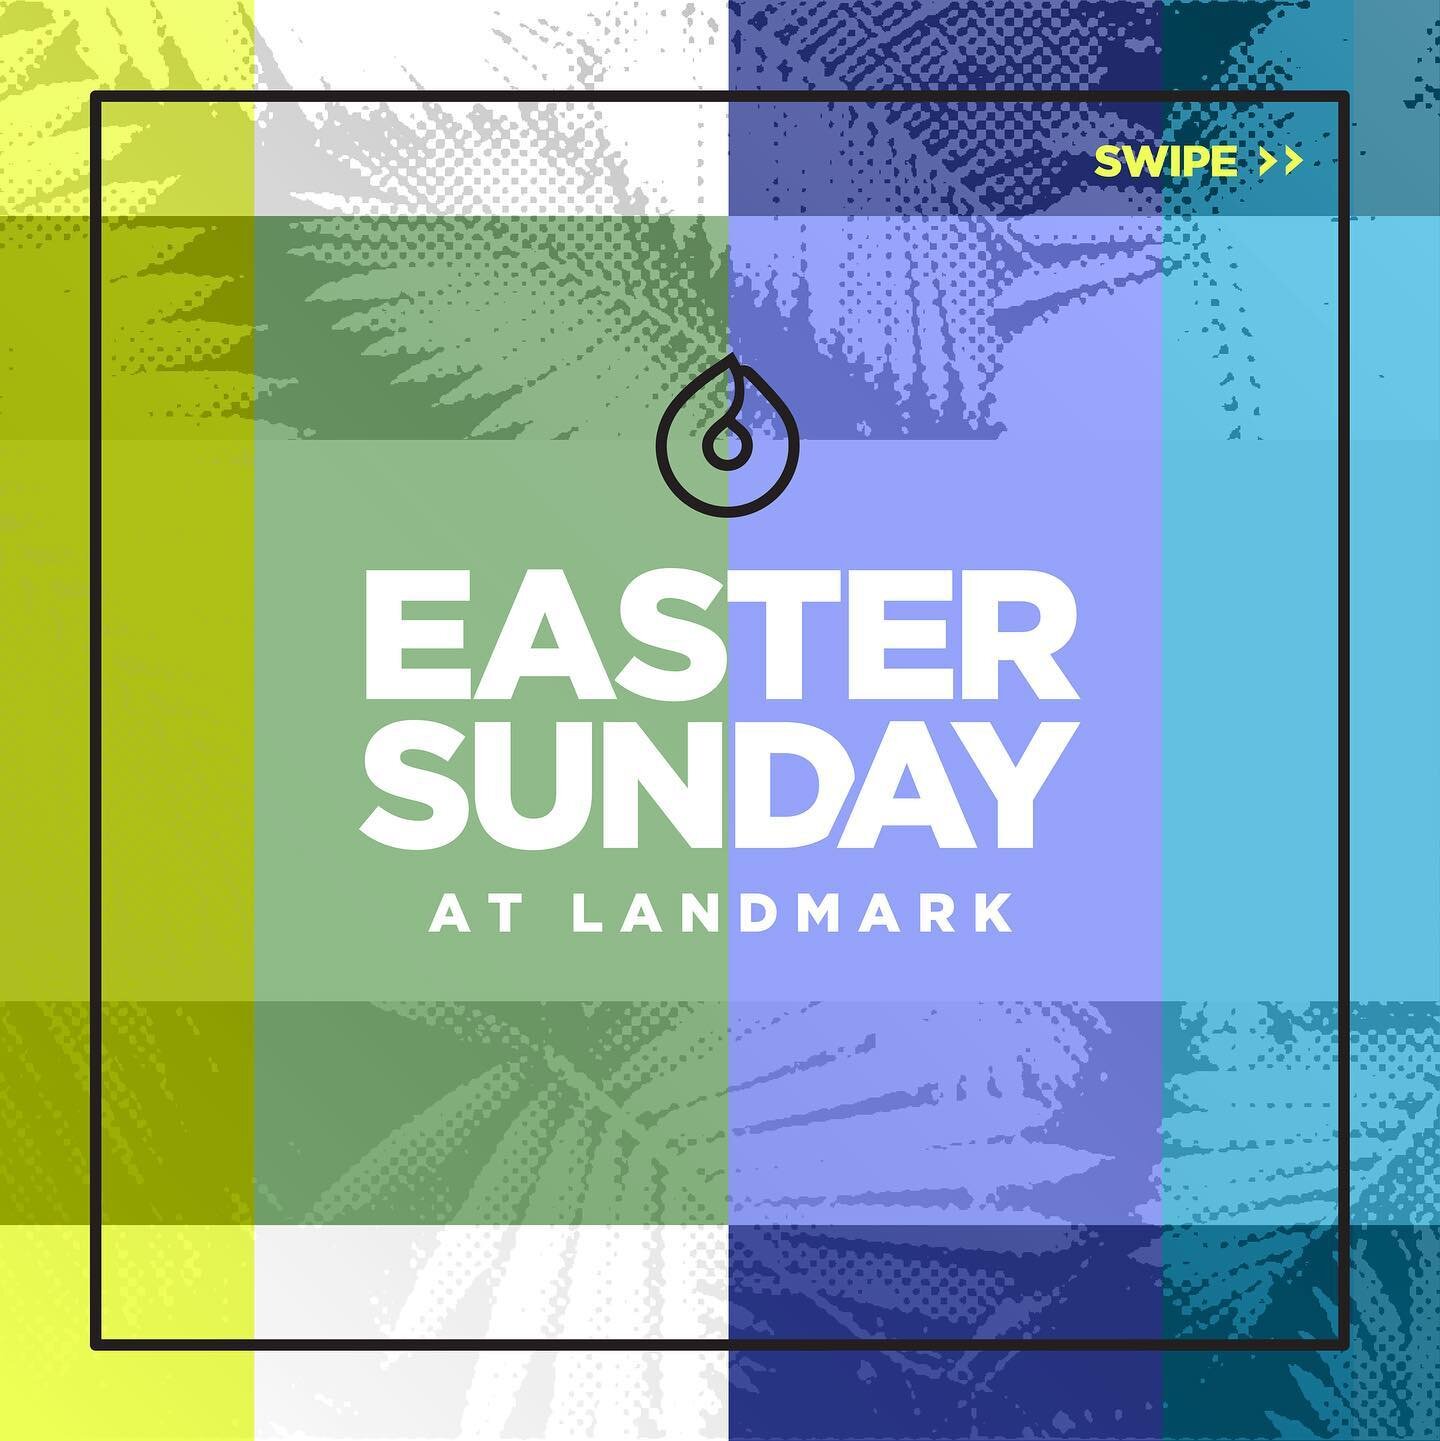 ⛪️🌤️🌷🕙 
Looking for an Easter Service to attend? We would love for you to join us at Landmark Worship Center.

Service starts at 10AM with Worship, with an🥚Egg Hunt🥚for the kids immediately following the service.

Bring your family! We can't wai